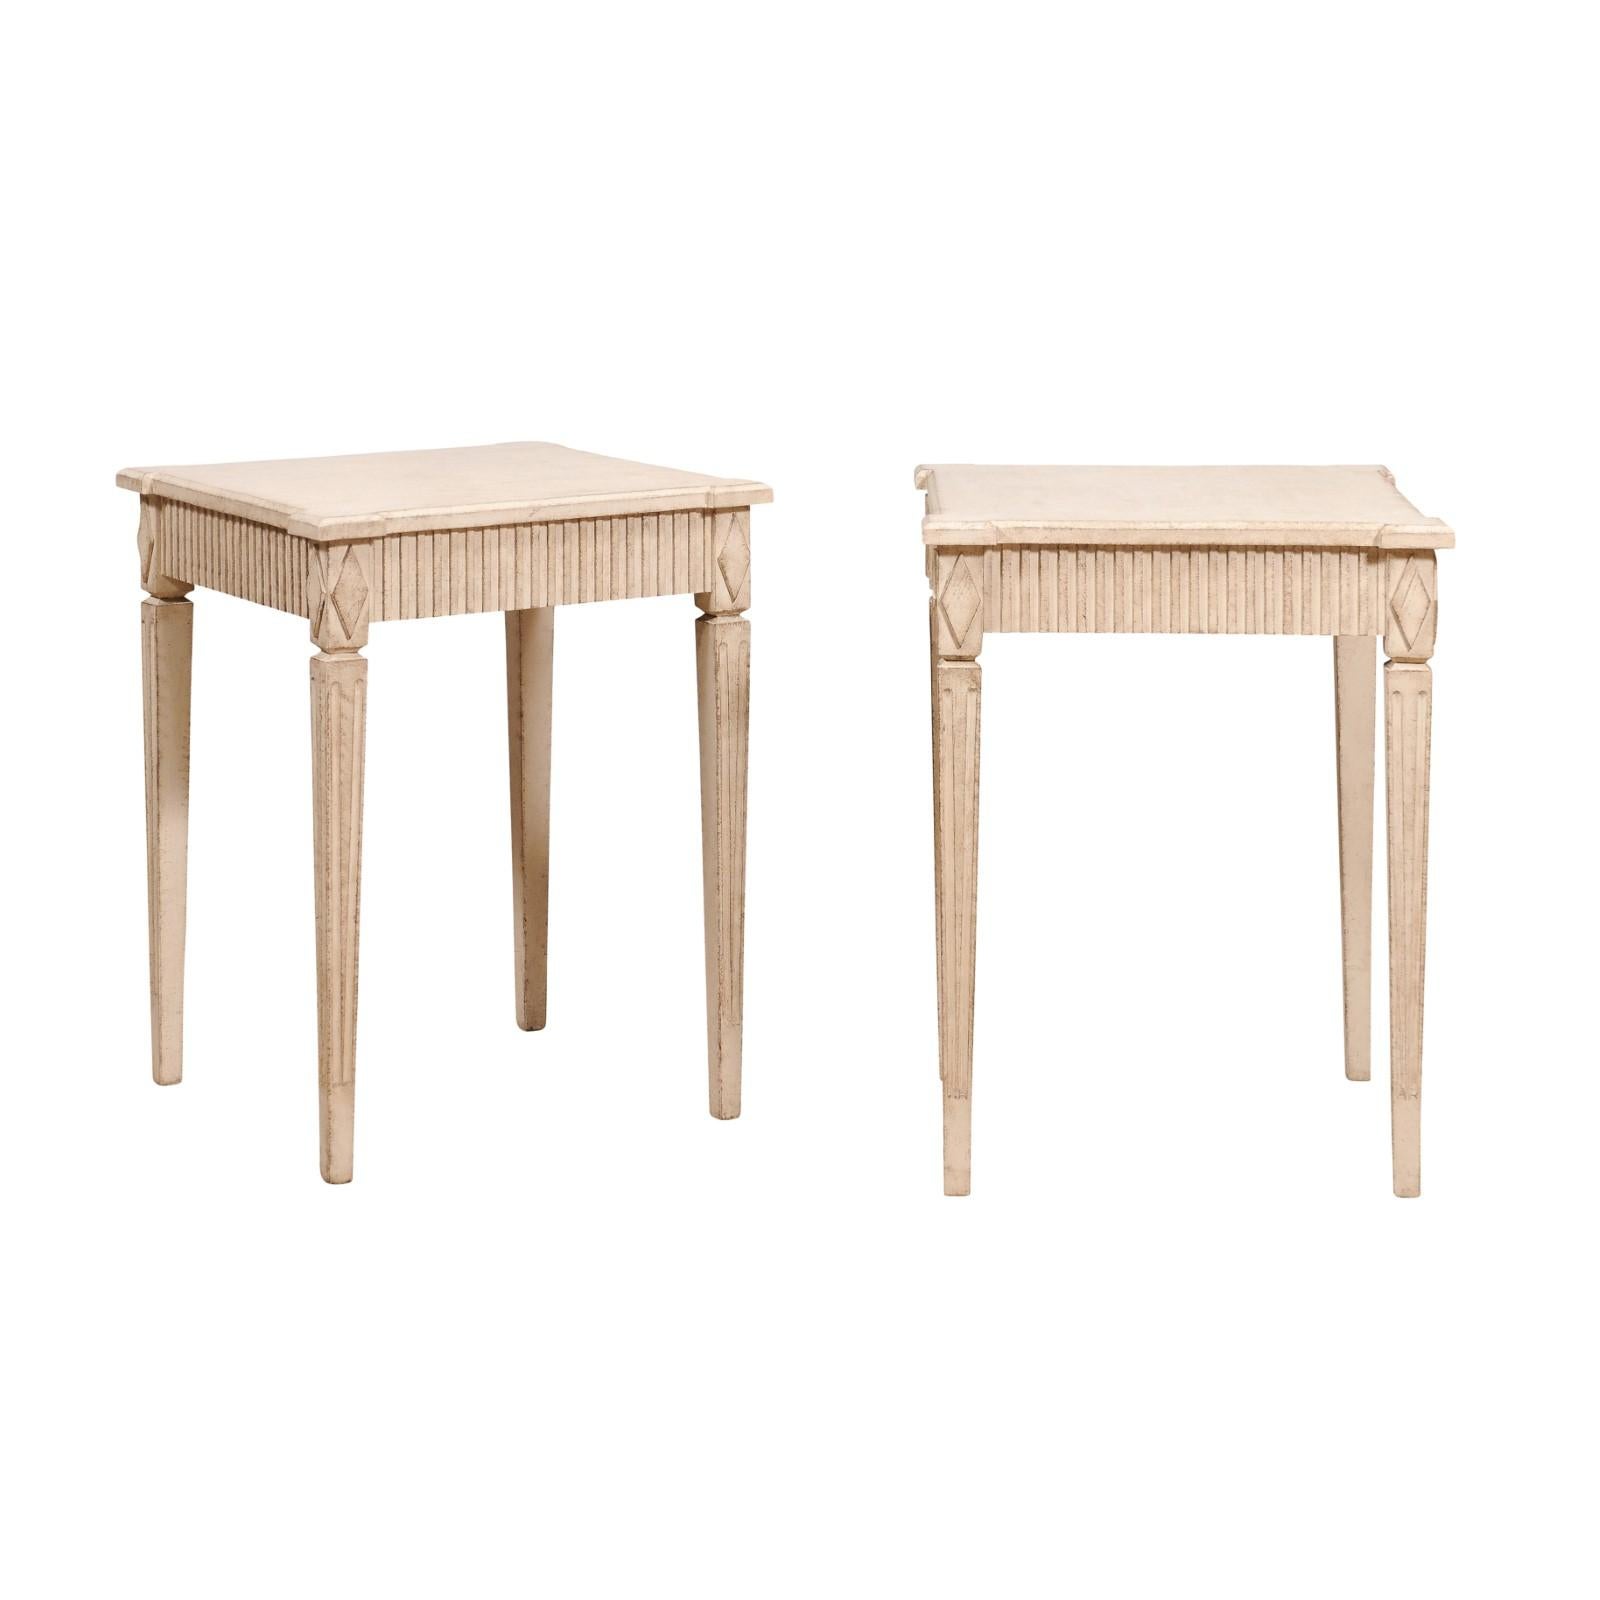 A pair of Swedish console tables from circa 1890 with light creamy yellow paint, carved aprons, diamond motifs and tapering fluted legs. This exquisite pair of Swedish console tables, dating back to circa 1890, embodies the timeless elegance and